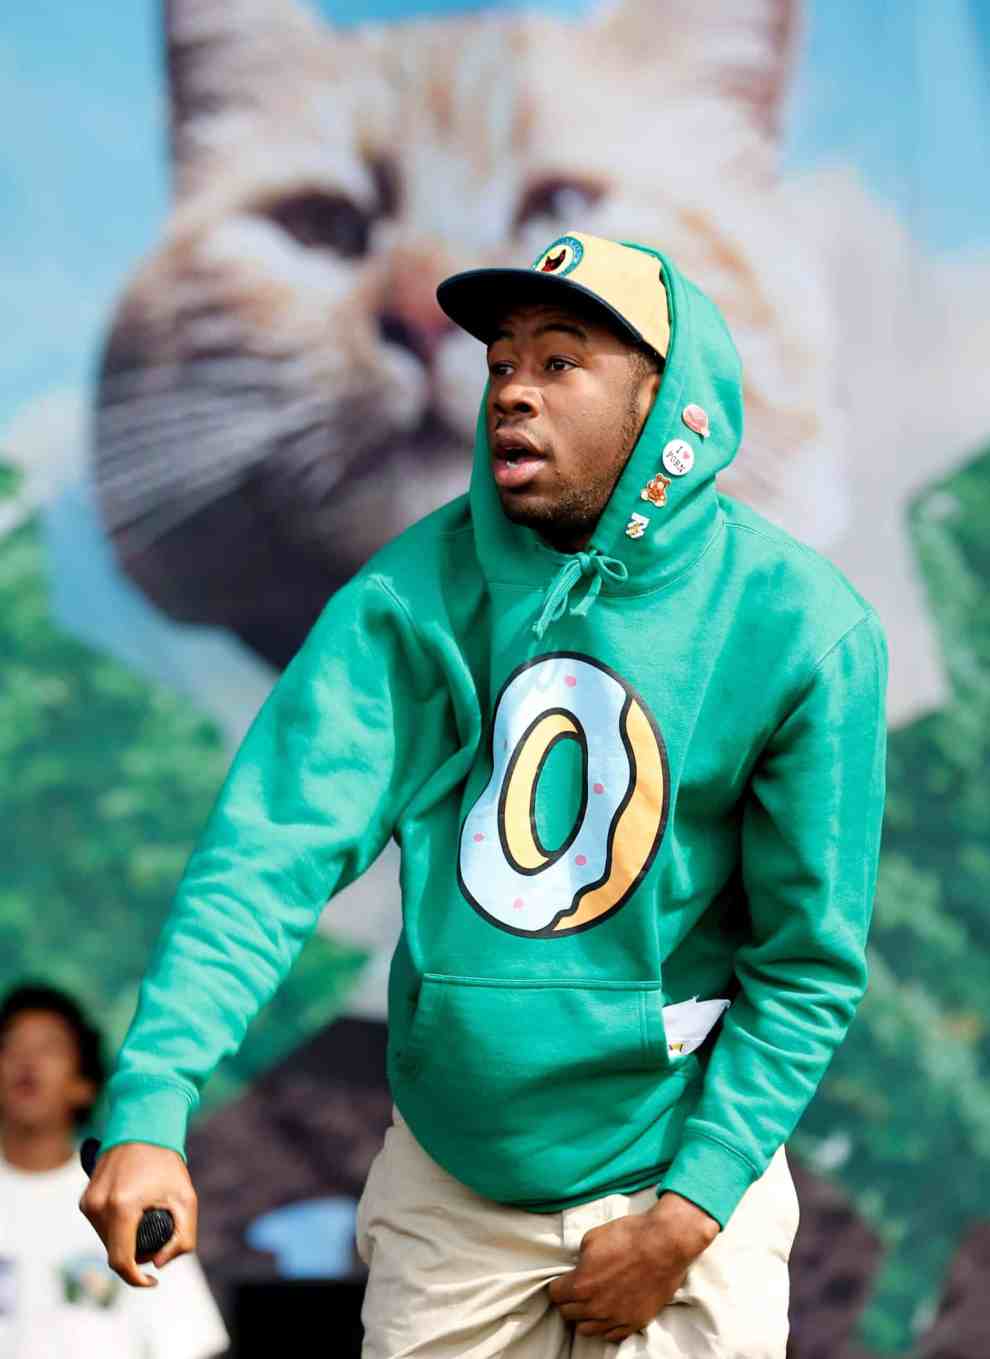 Tyler the Creator of Odd Future Wolf Gang Kill Them All (OFWGKTA) performs live at the Reading Festival 2012